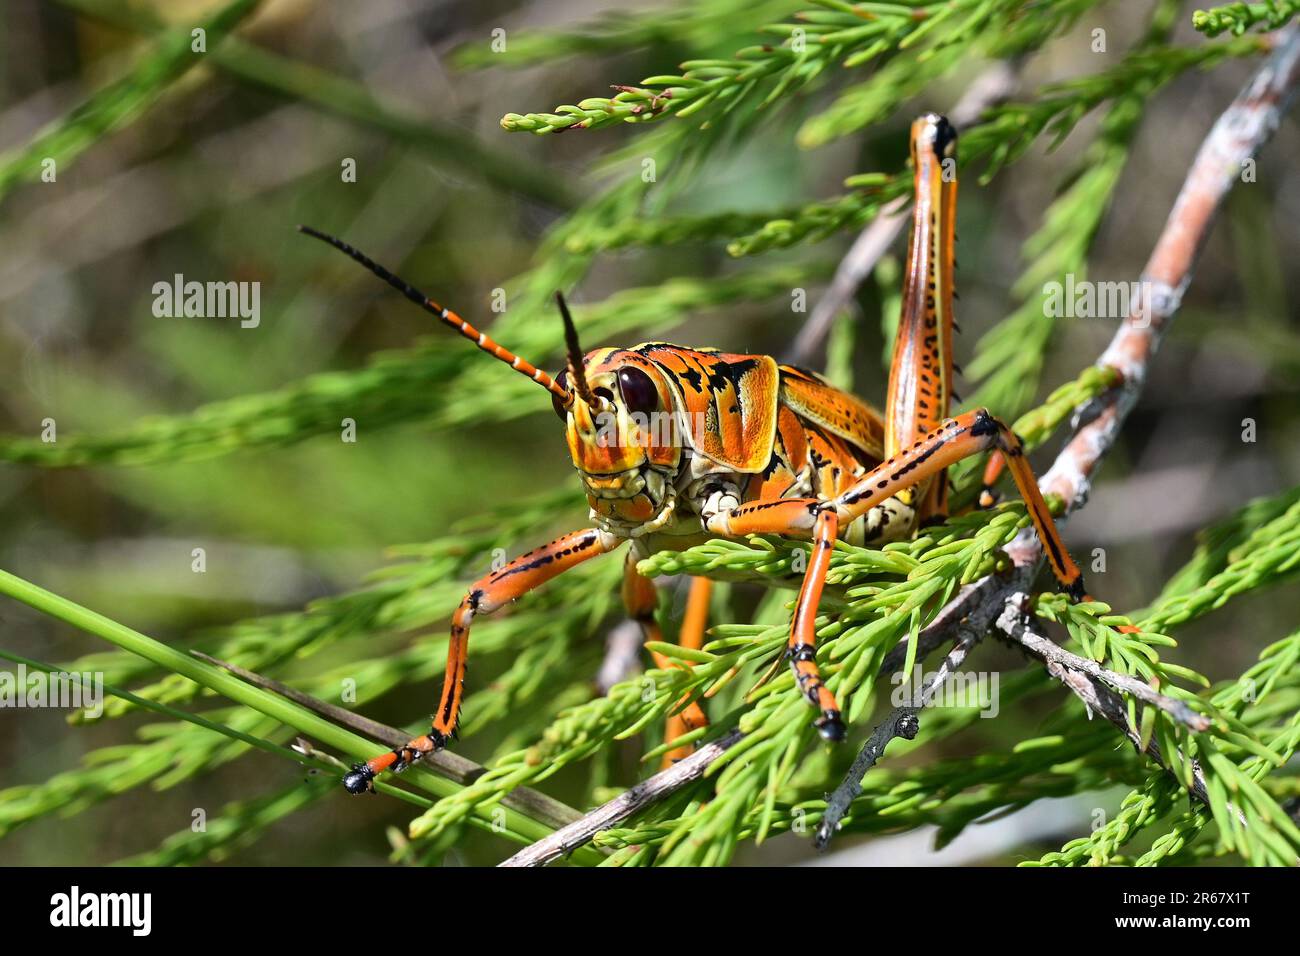 Eastern Lubber Grasshopper - Romalea microptera - perched on cypress branch in Dwark Cypress Forest in Everglades National Park, Florida.. Stock Photo